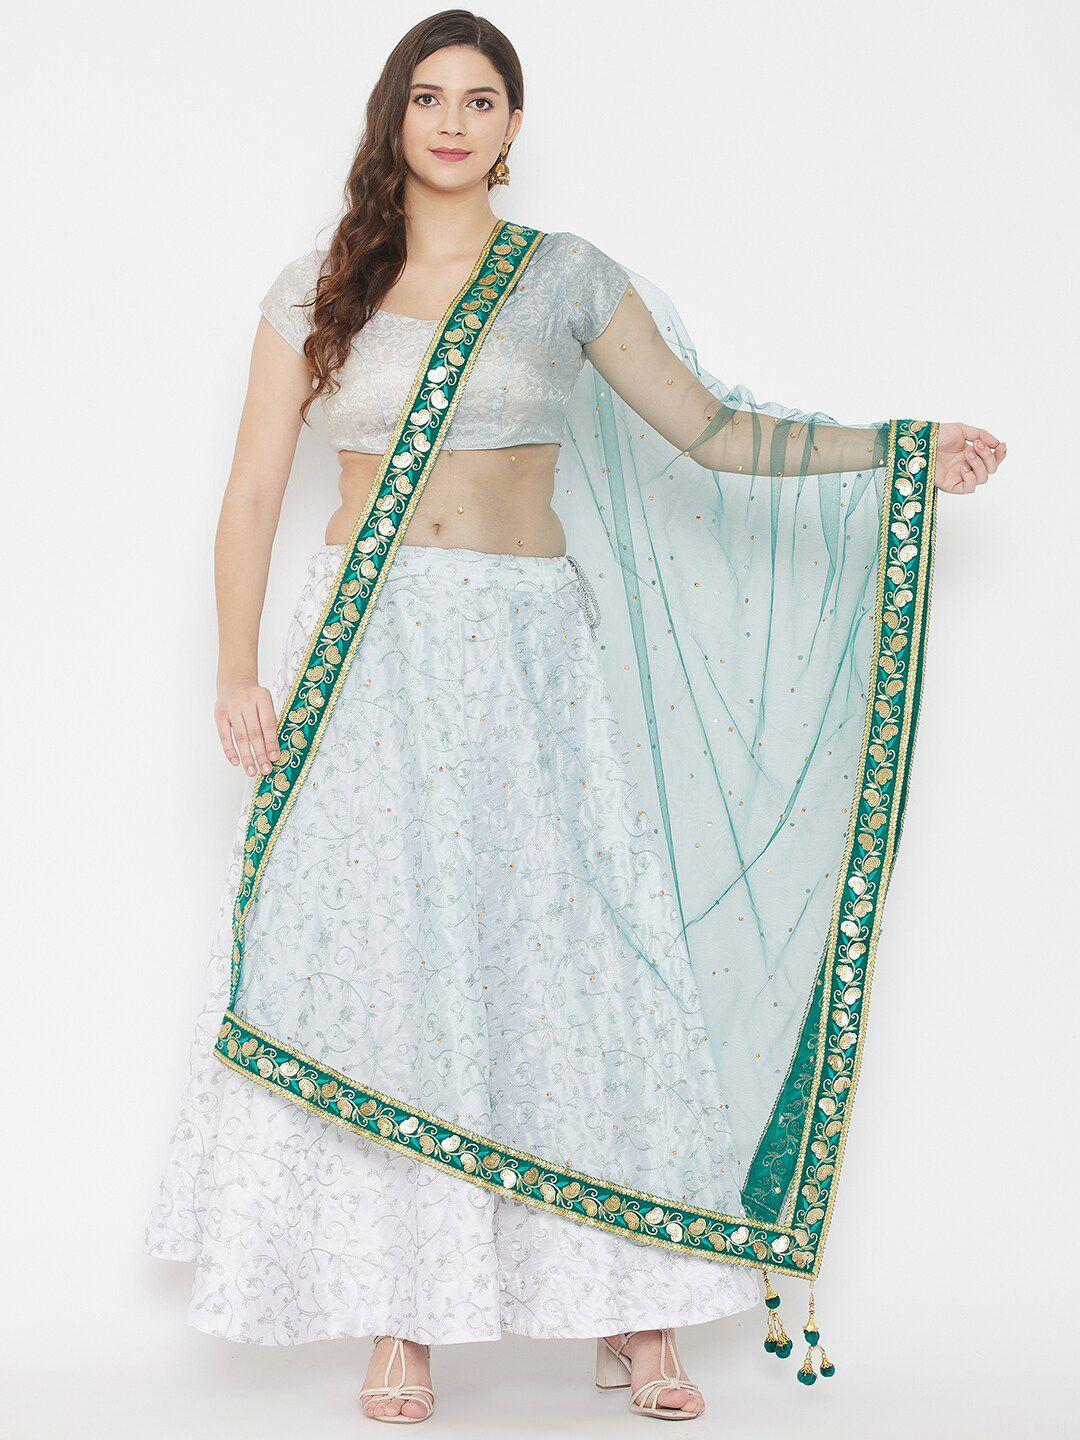 clora-creation-green-&-gold-toned-ethnic-motifs-embroidered-dupatta-with-sequinned